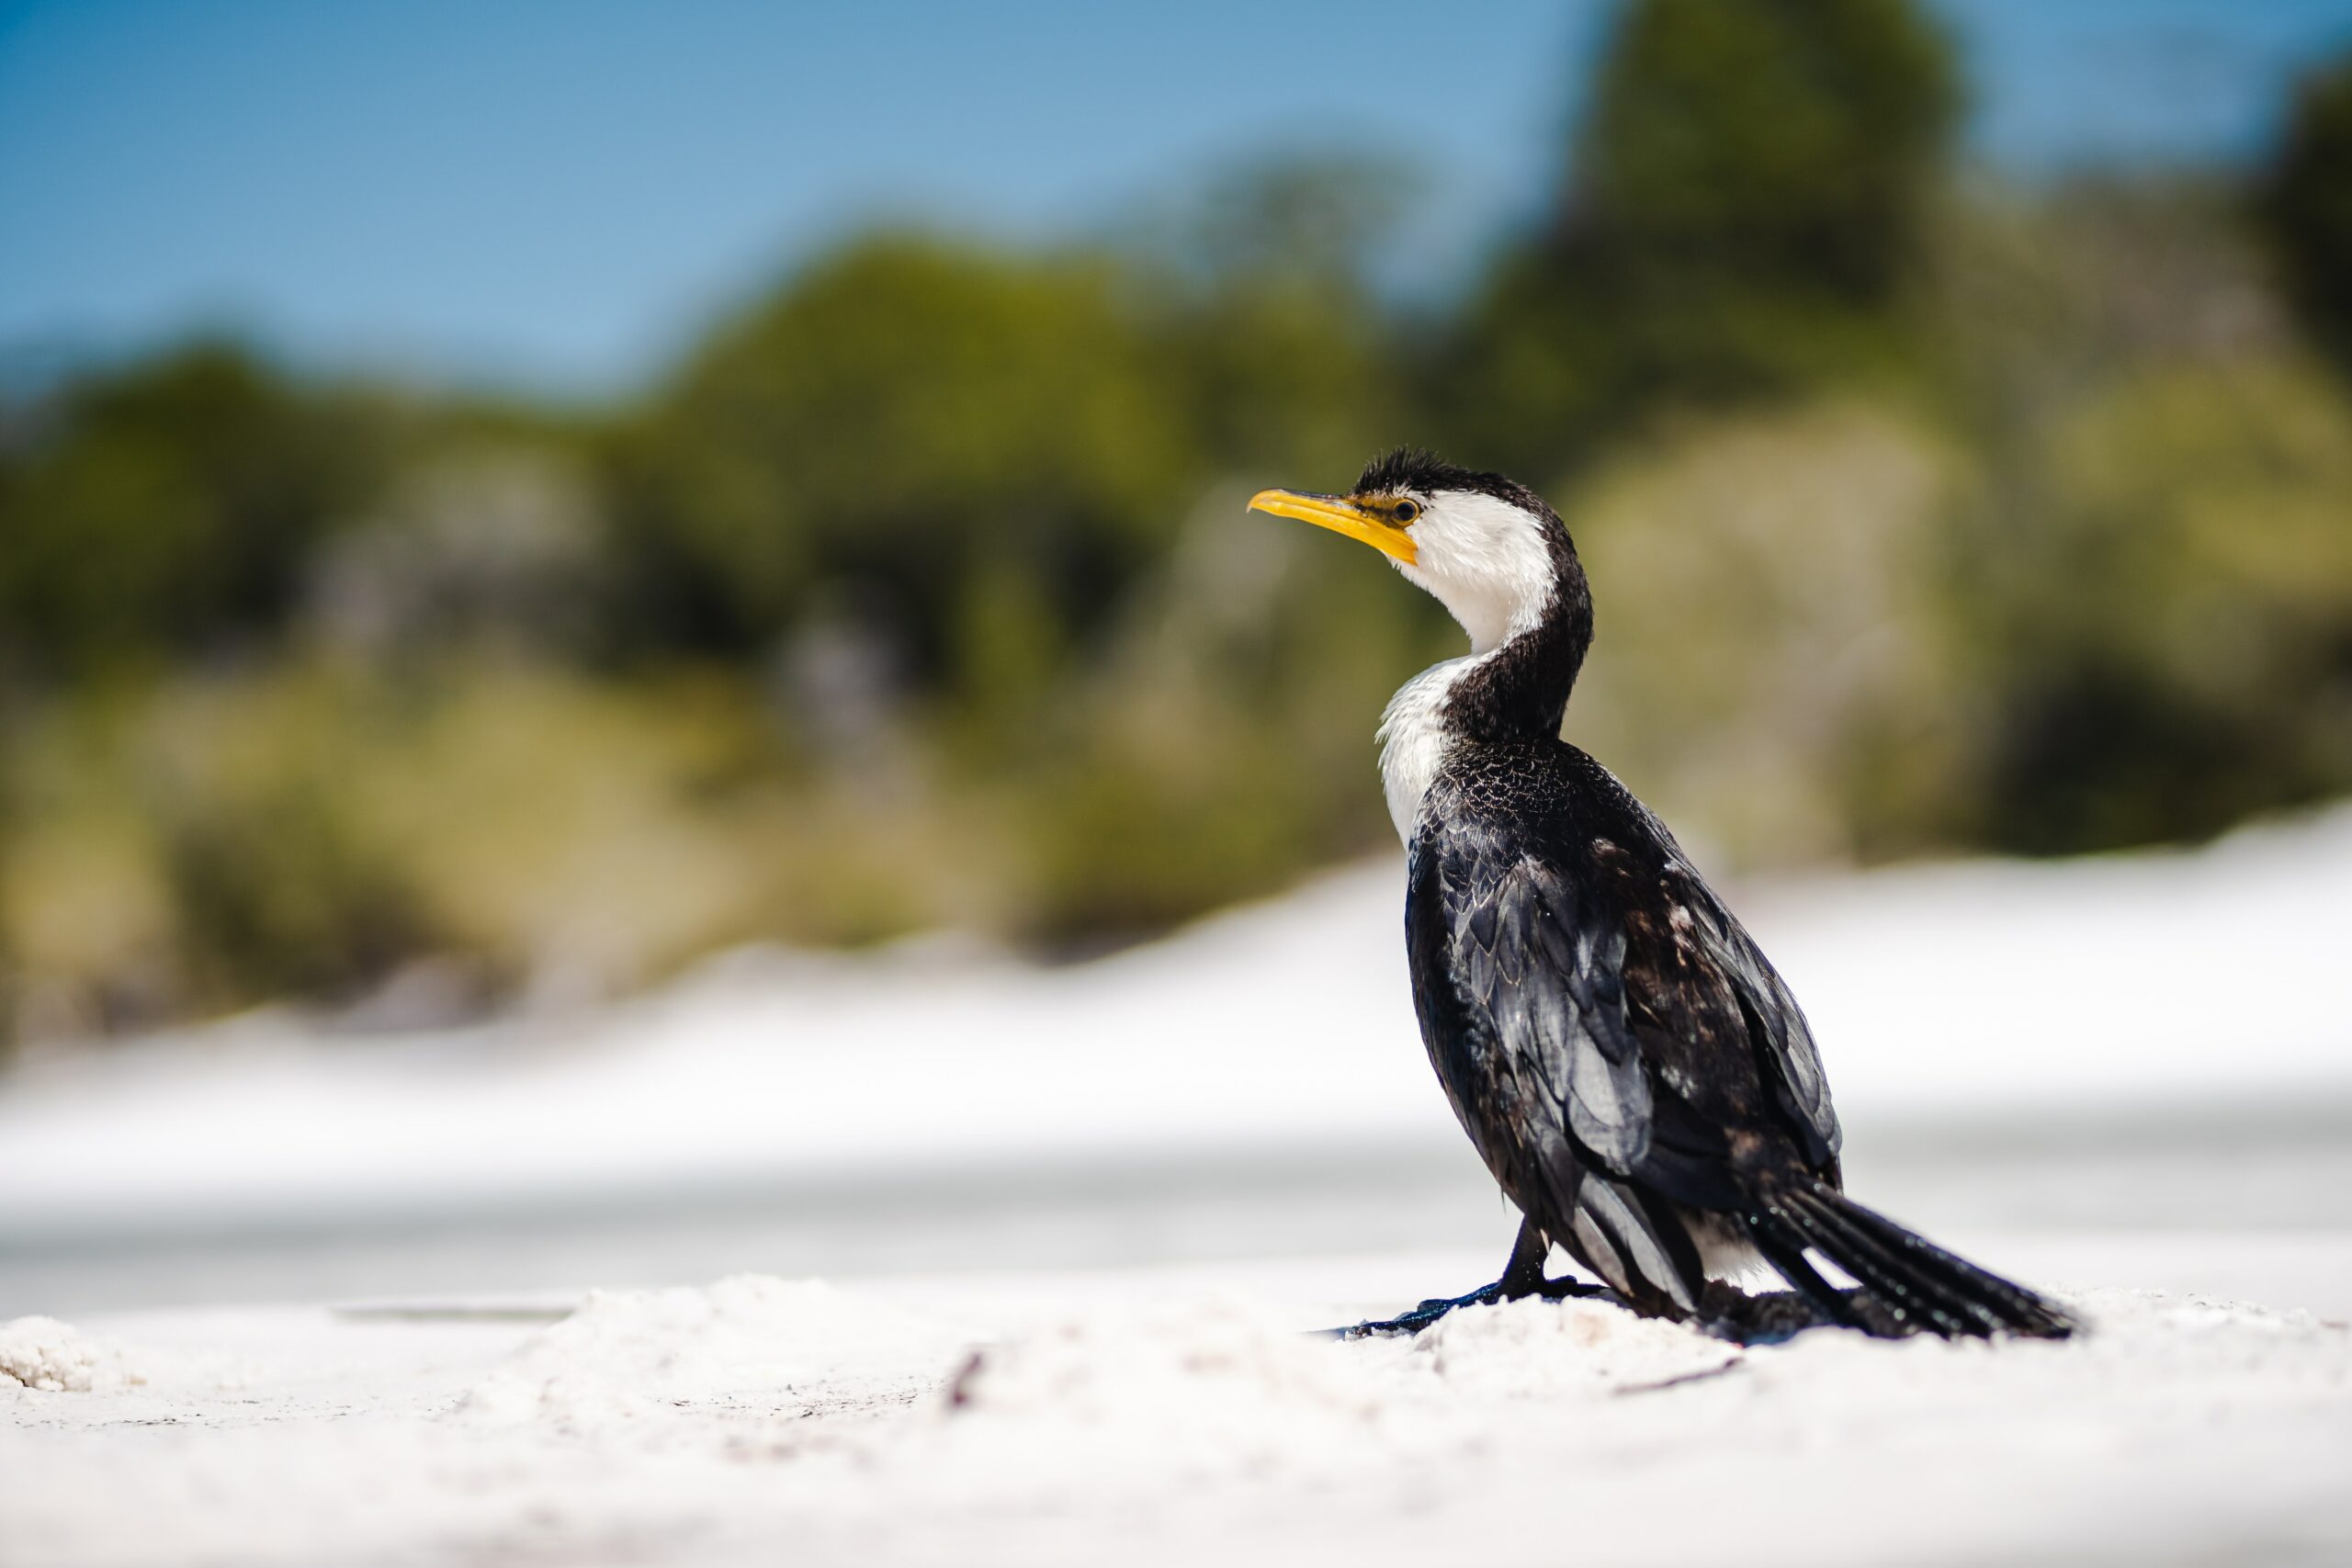 This is a photograph of a pied cormorant sitting on white sand. The bird has black feathers on its back, and white feathers on its face, neck and stomach. Its eyes are small and black, and it has a long yellow beak. There is green shrubbery in the background and the blue sky above.